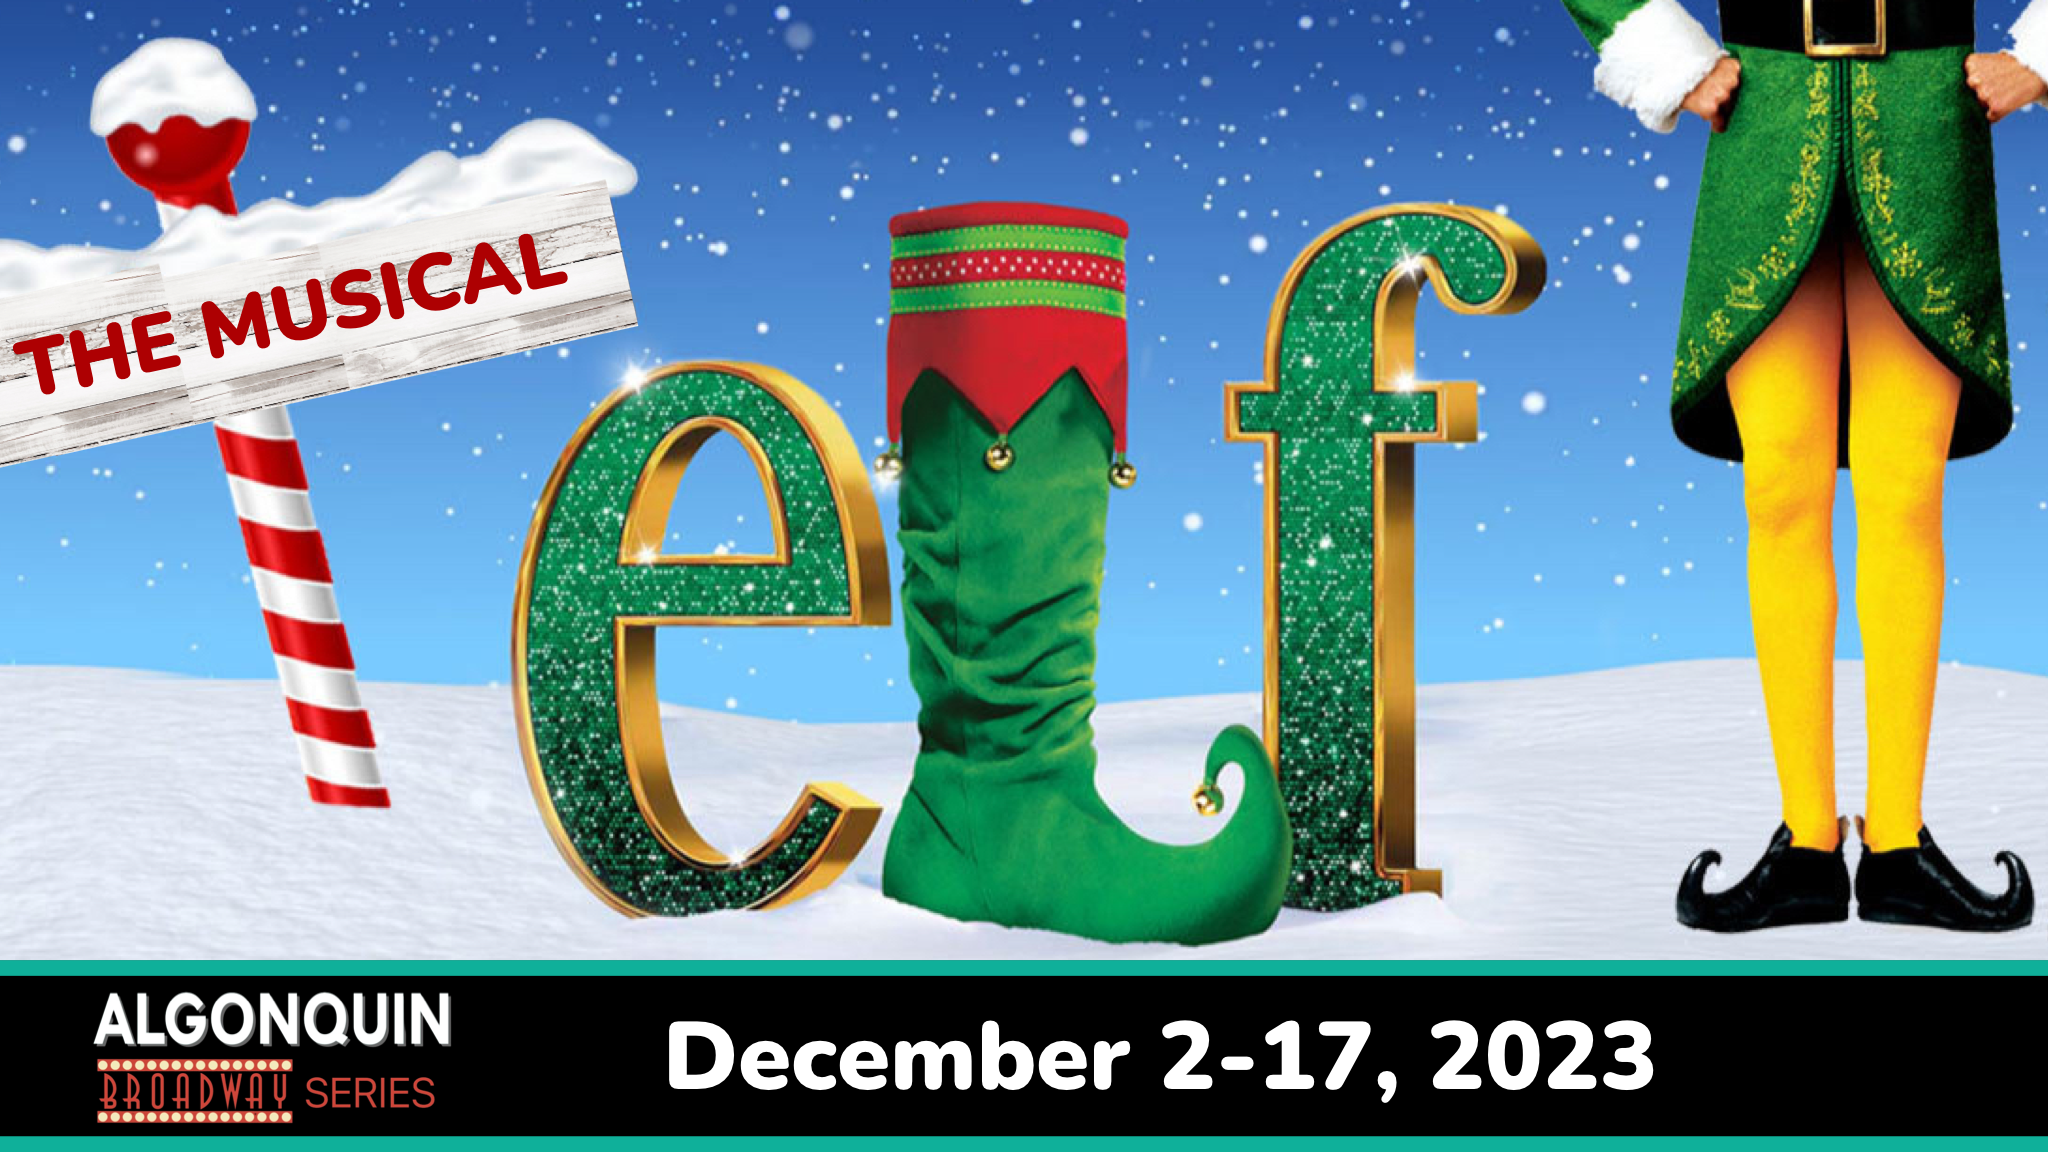 Algonquin Arts Theatre Announces Casting
and Creative Team for Sold-Out Run of
ELF: The Musical! Performance Added on Saturday, December 2 at 7:30PM